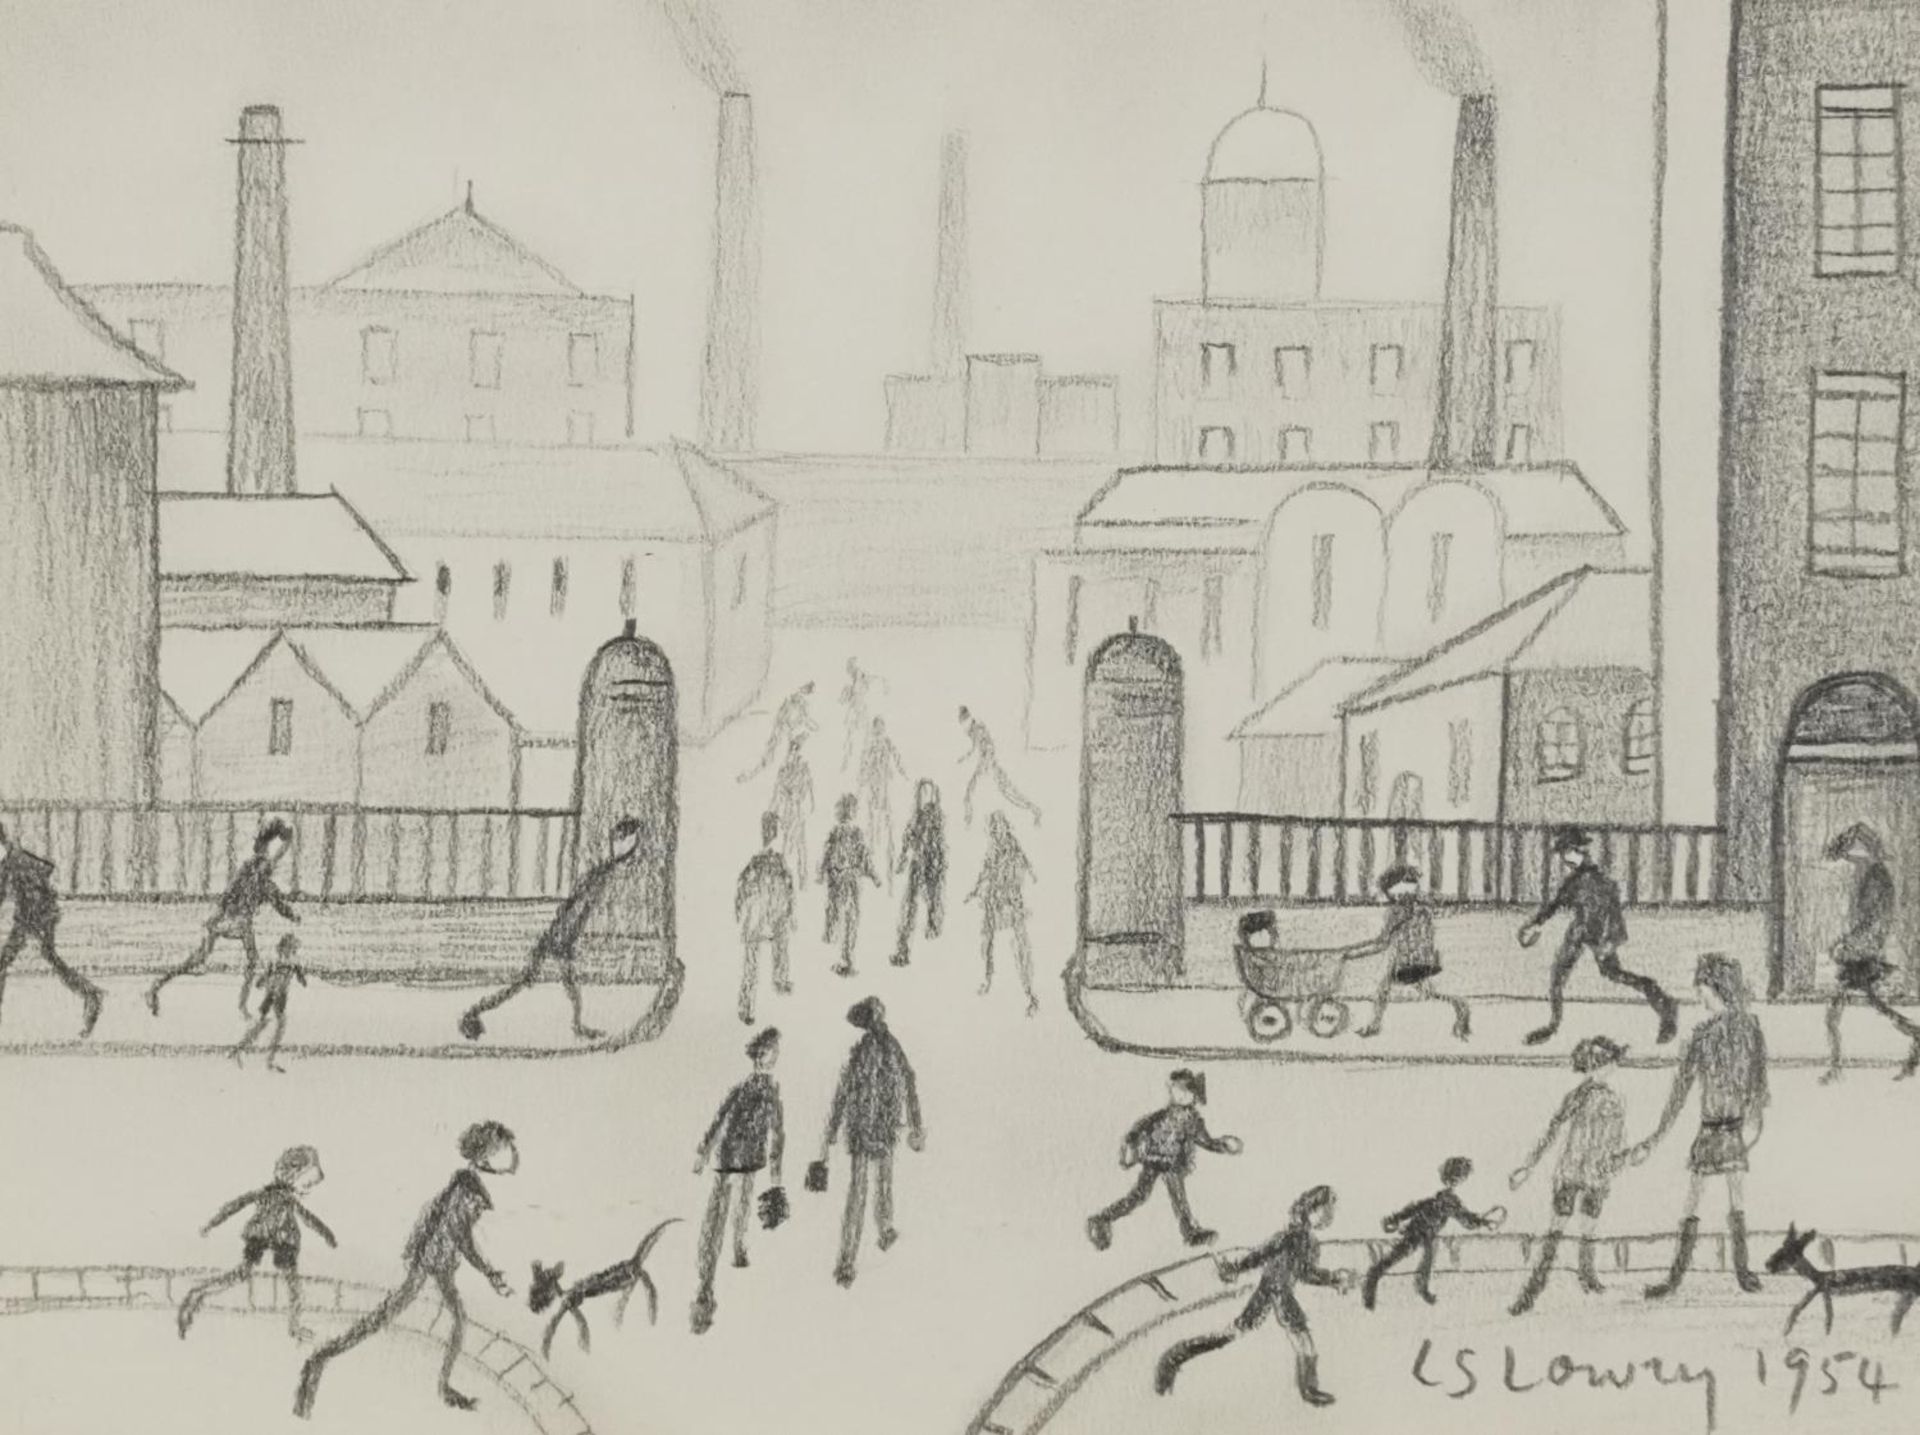 Manner of Laurence Stephen Lowry - Industrial scene with figures, Manchester school pencil, mounted,